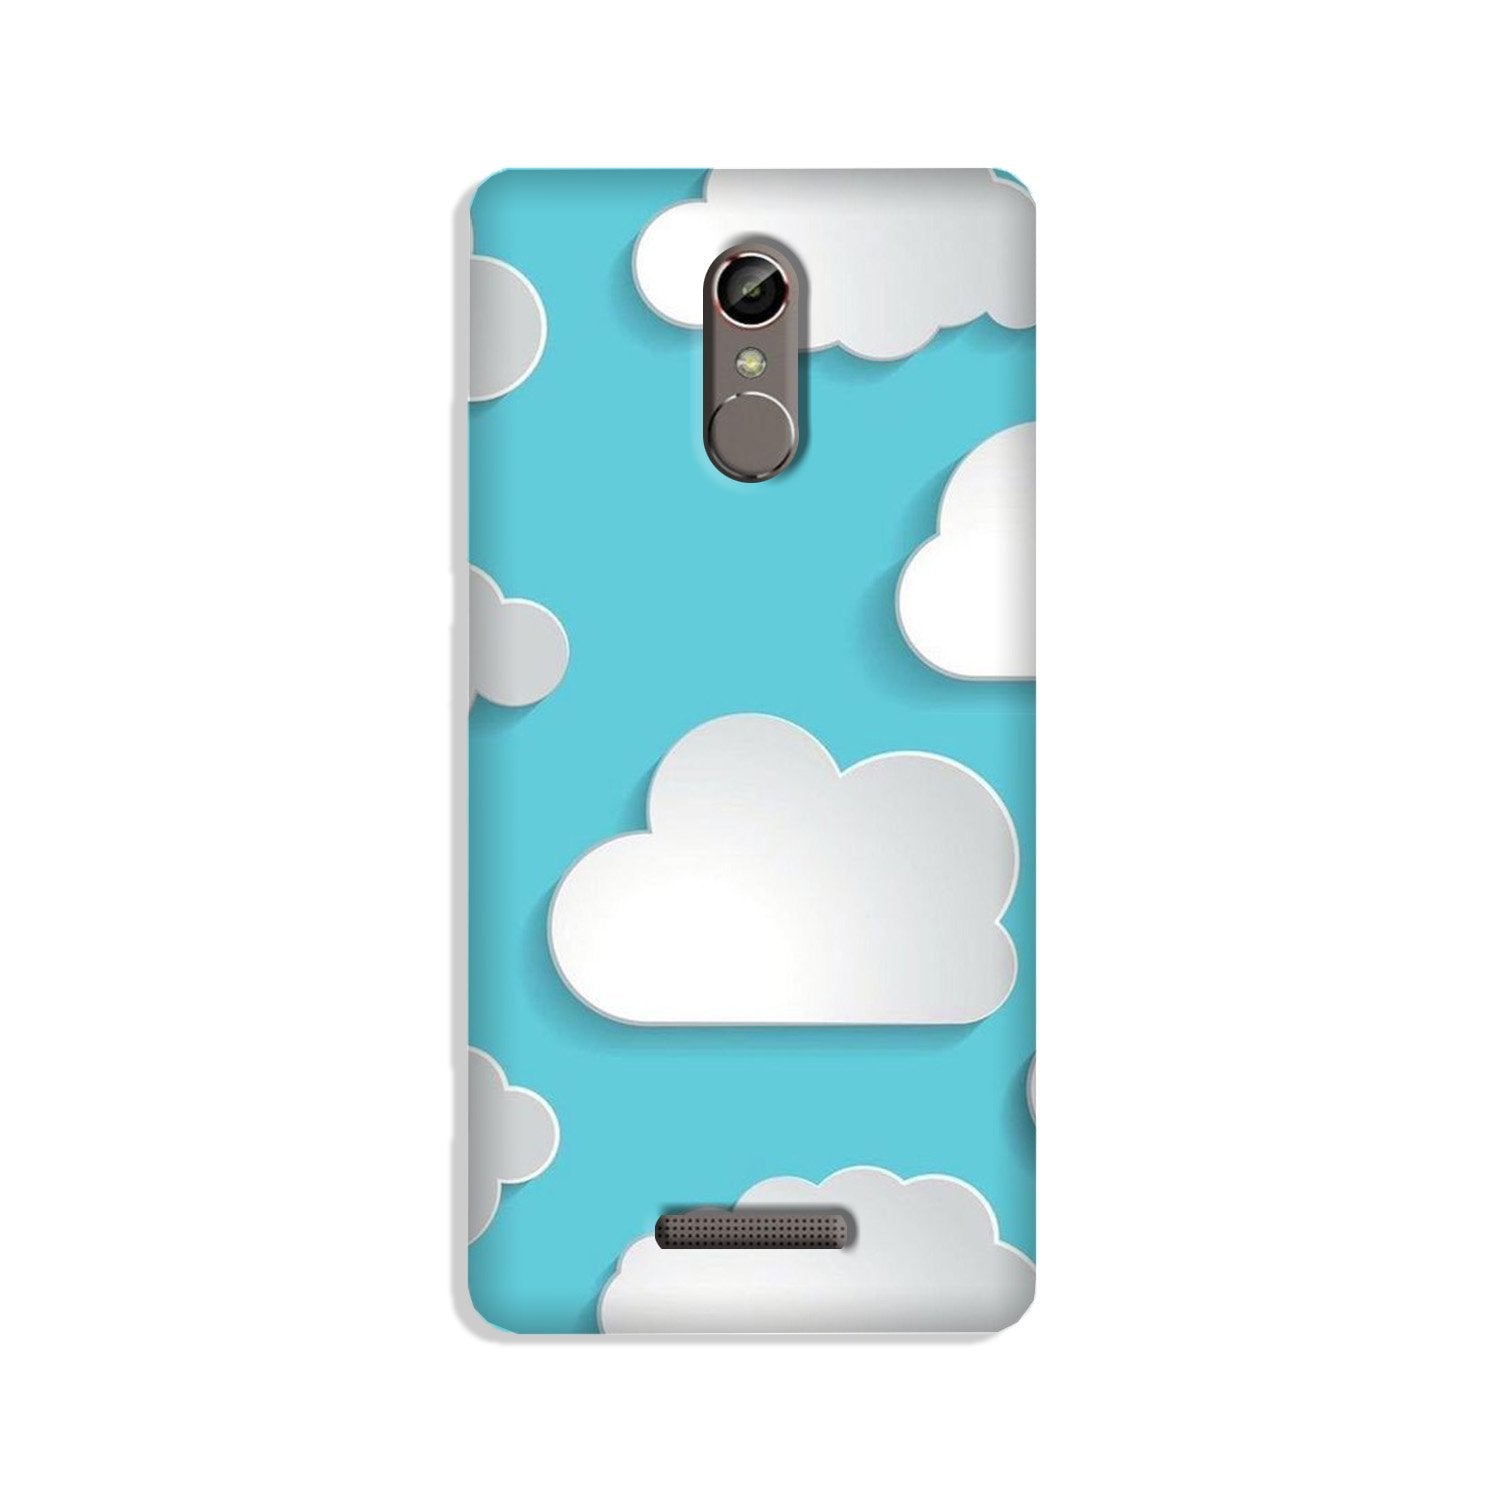 Clouds Case for Gionee S6s (Design No. 210)